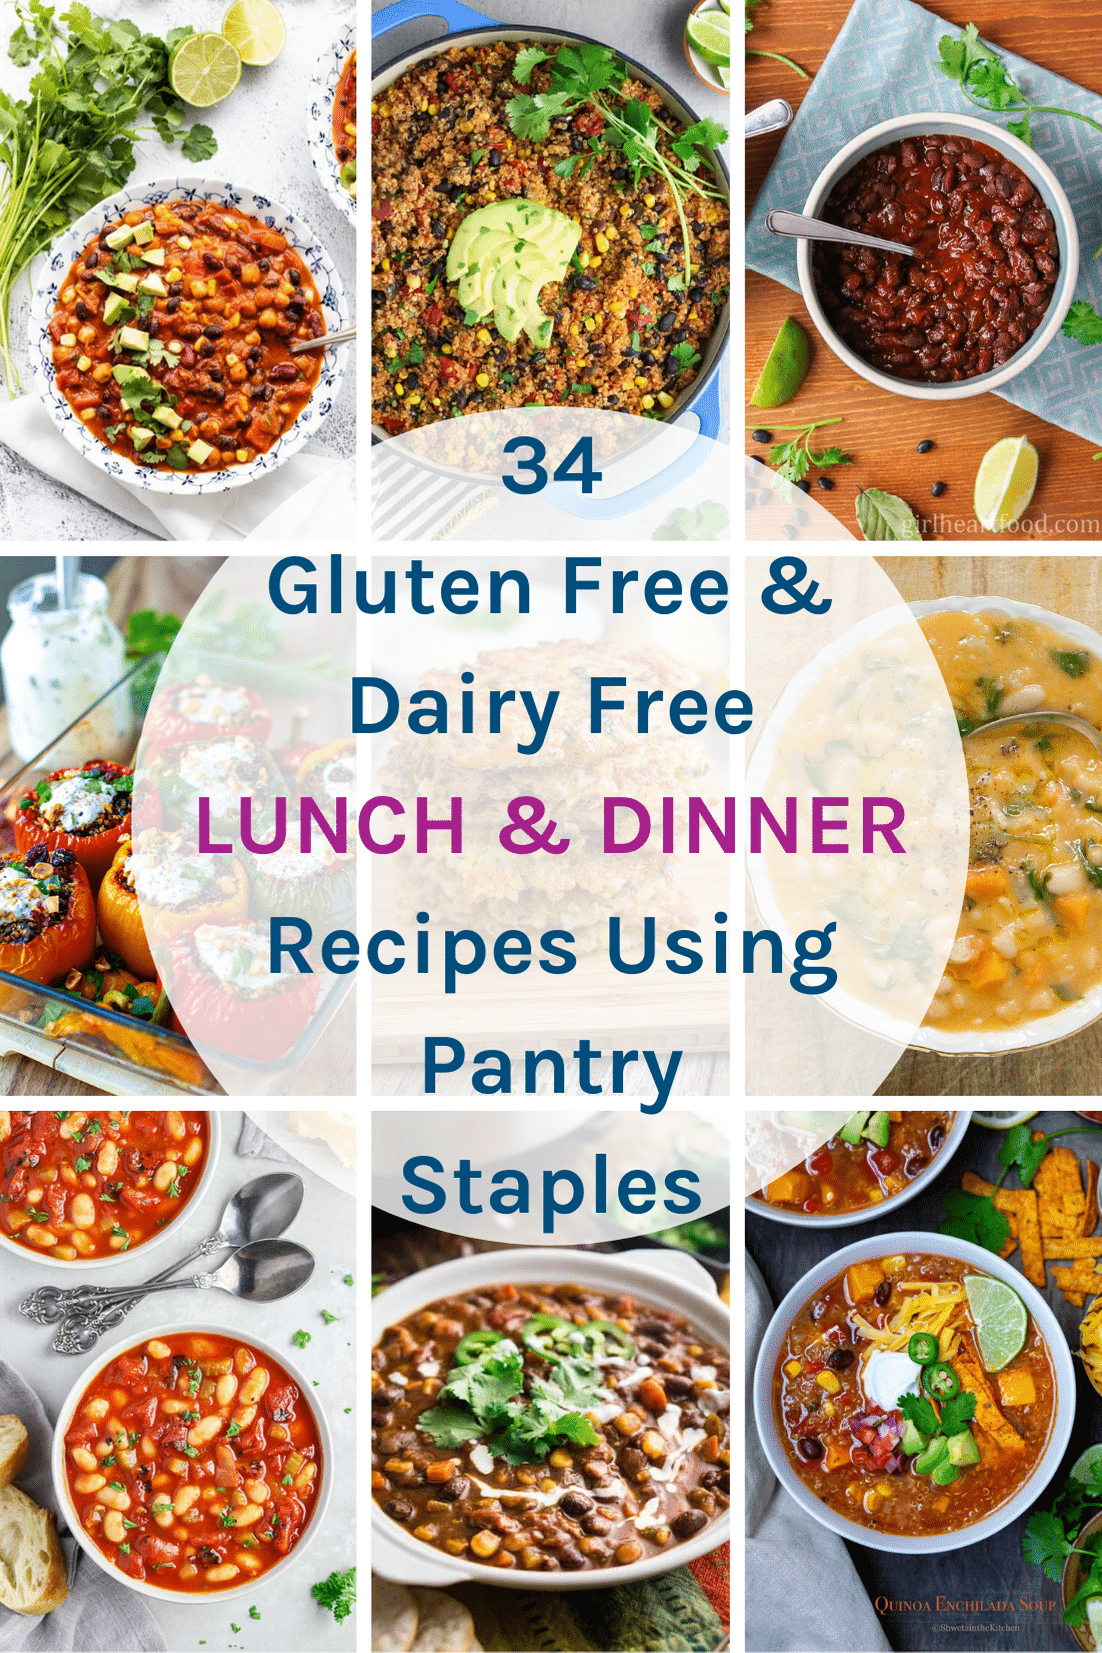 34 Gluten Free Dairy Free Lunch & Dinner Recipes Using Pantry Staples - These recipes all use pantry staples that you should keep on hand to help you during times of crisis. Included are recipes that use tinned tomatoes & passata, quinoa & rice, tinned tuna or beans & lentils.